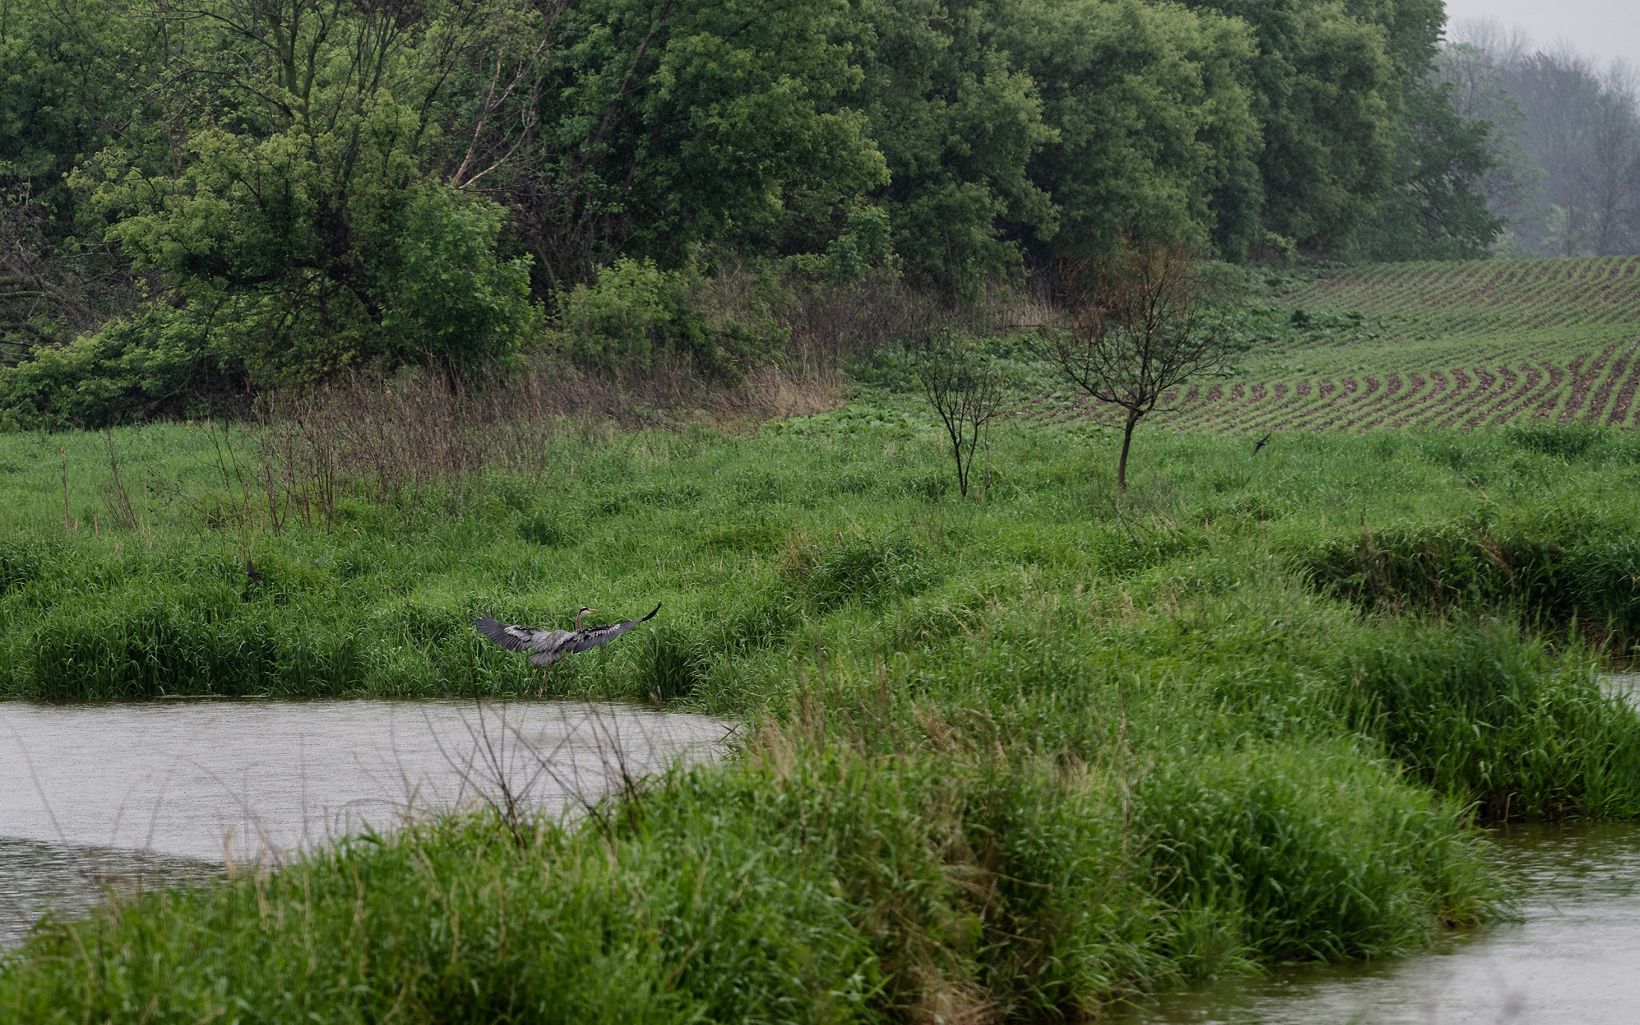 A great blue heron spreads its wings and lands near the edge of a small body of water surrounded by tall green grasses, with a farm field and forest in the background.